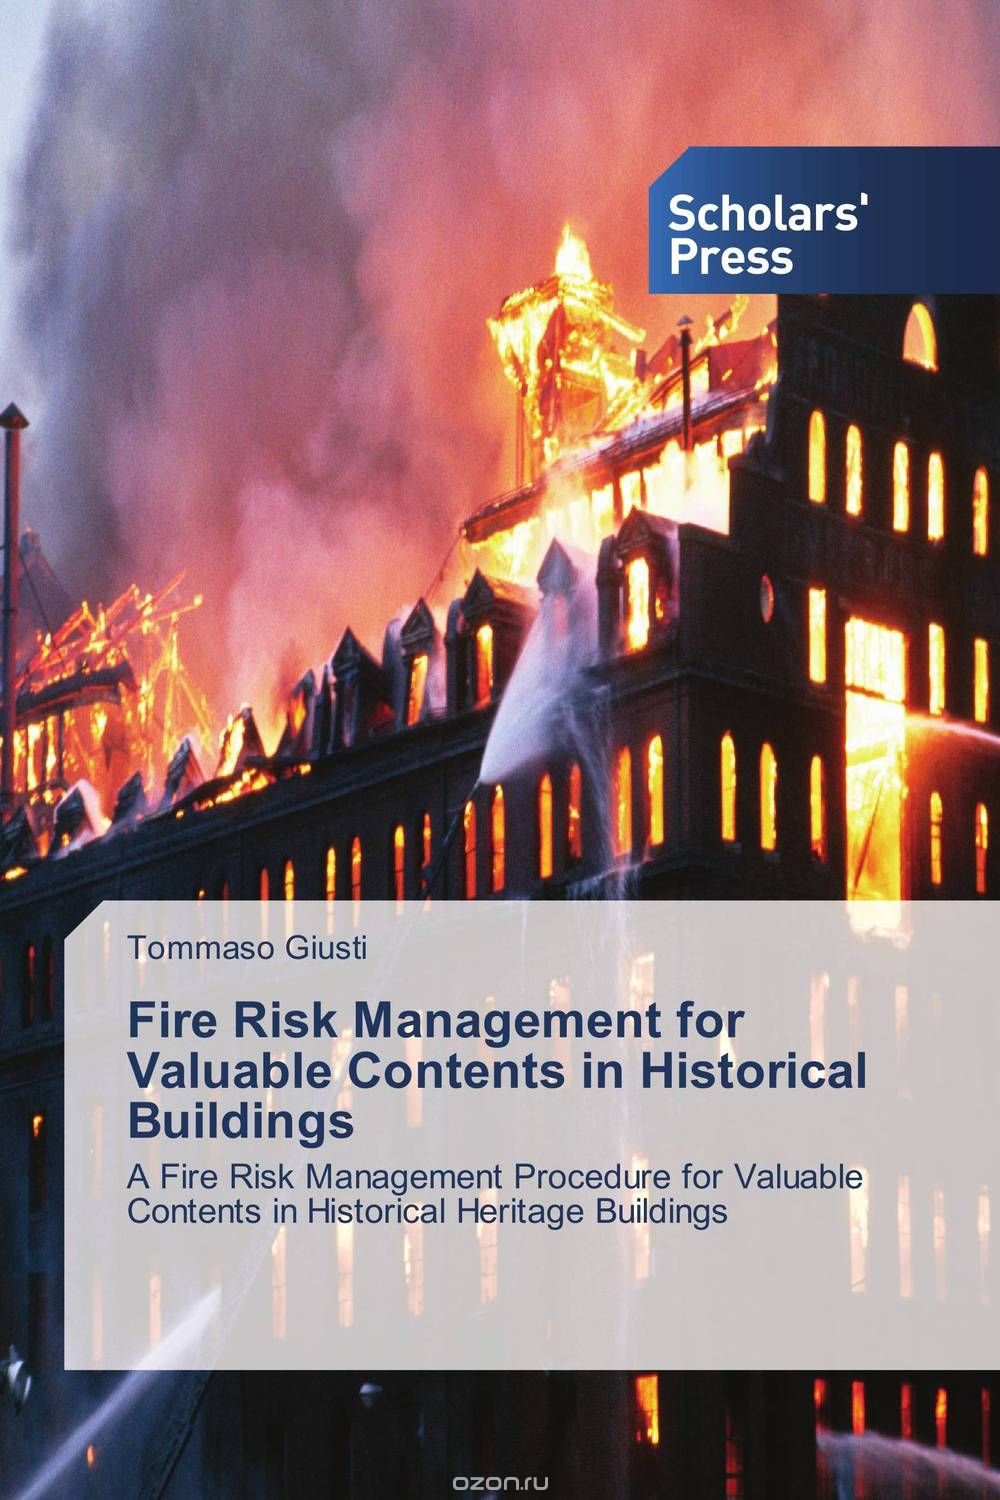 Fire Risk Management for Valuable Contents in Historical Buildings